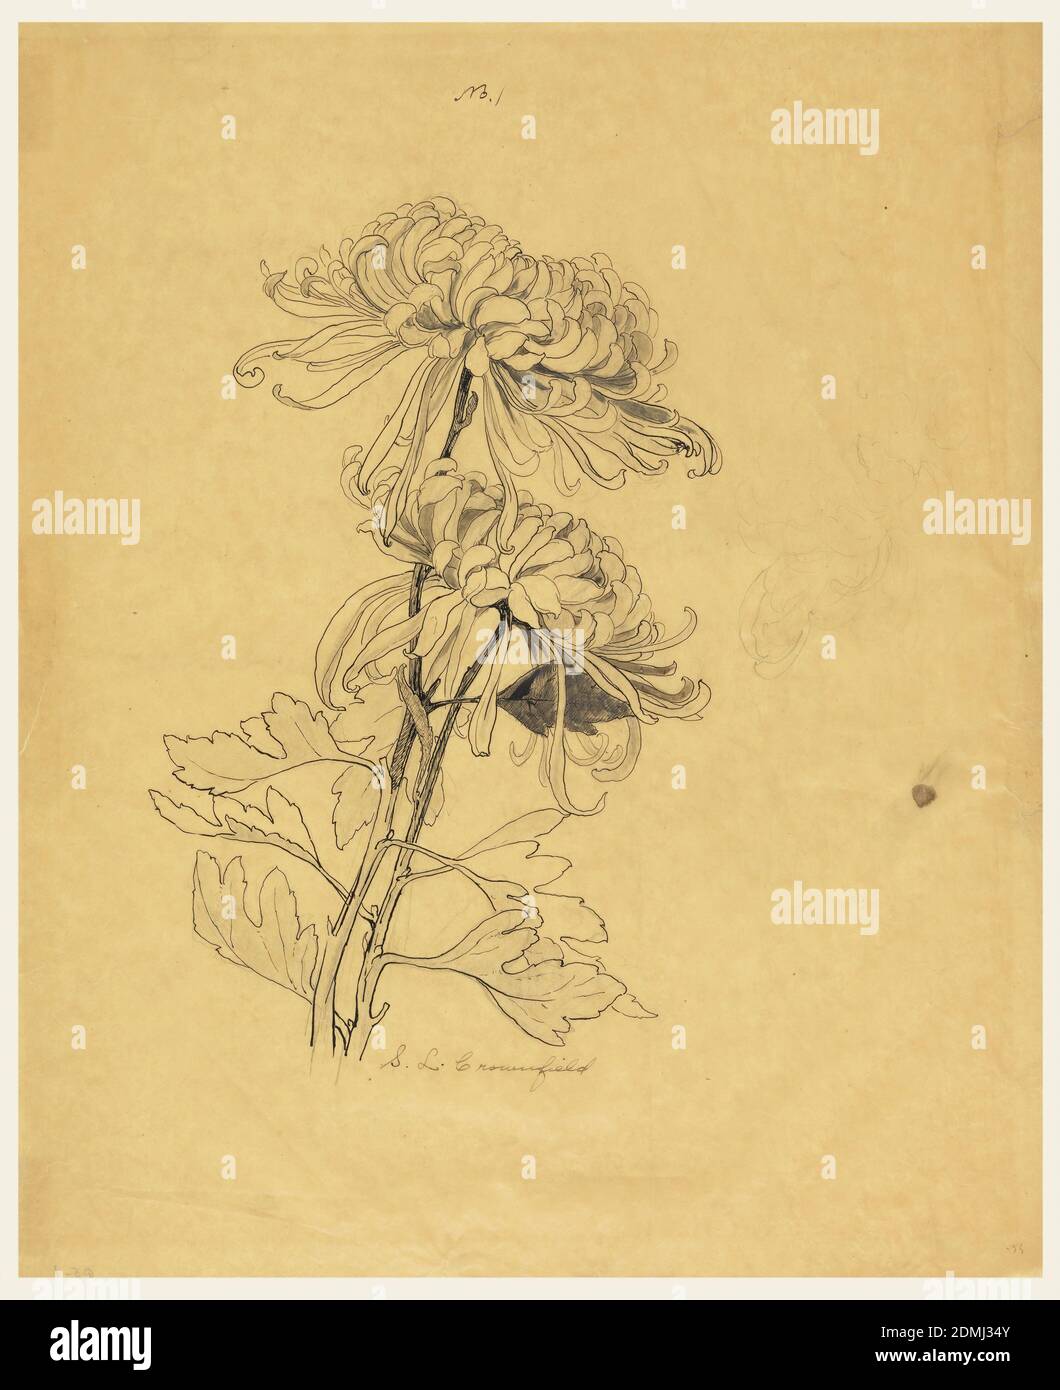 Study of Two Chrysanthemums, Sophia L. Crownfield, (American, 1862–1929), Graphite, pen and ink, brush and ink on yellow tracing paper, A study of two chrysanthemums with long stems and leaves. At right, some details are sketched in graphite., USA, early 20th century, nature studies, Drawing Stock Photo